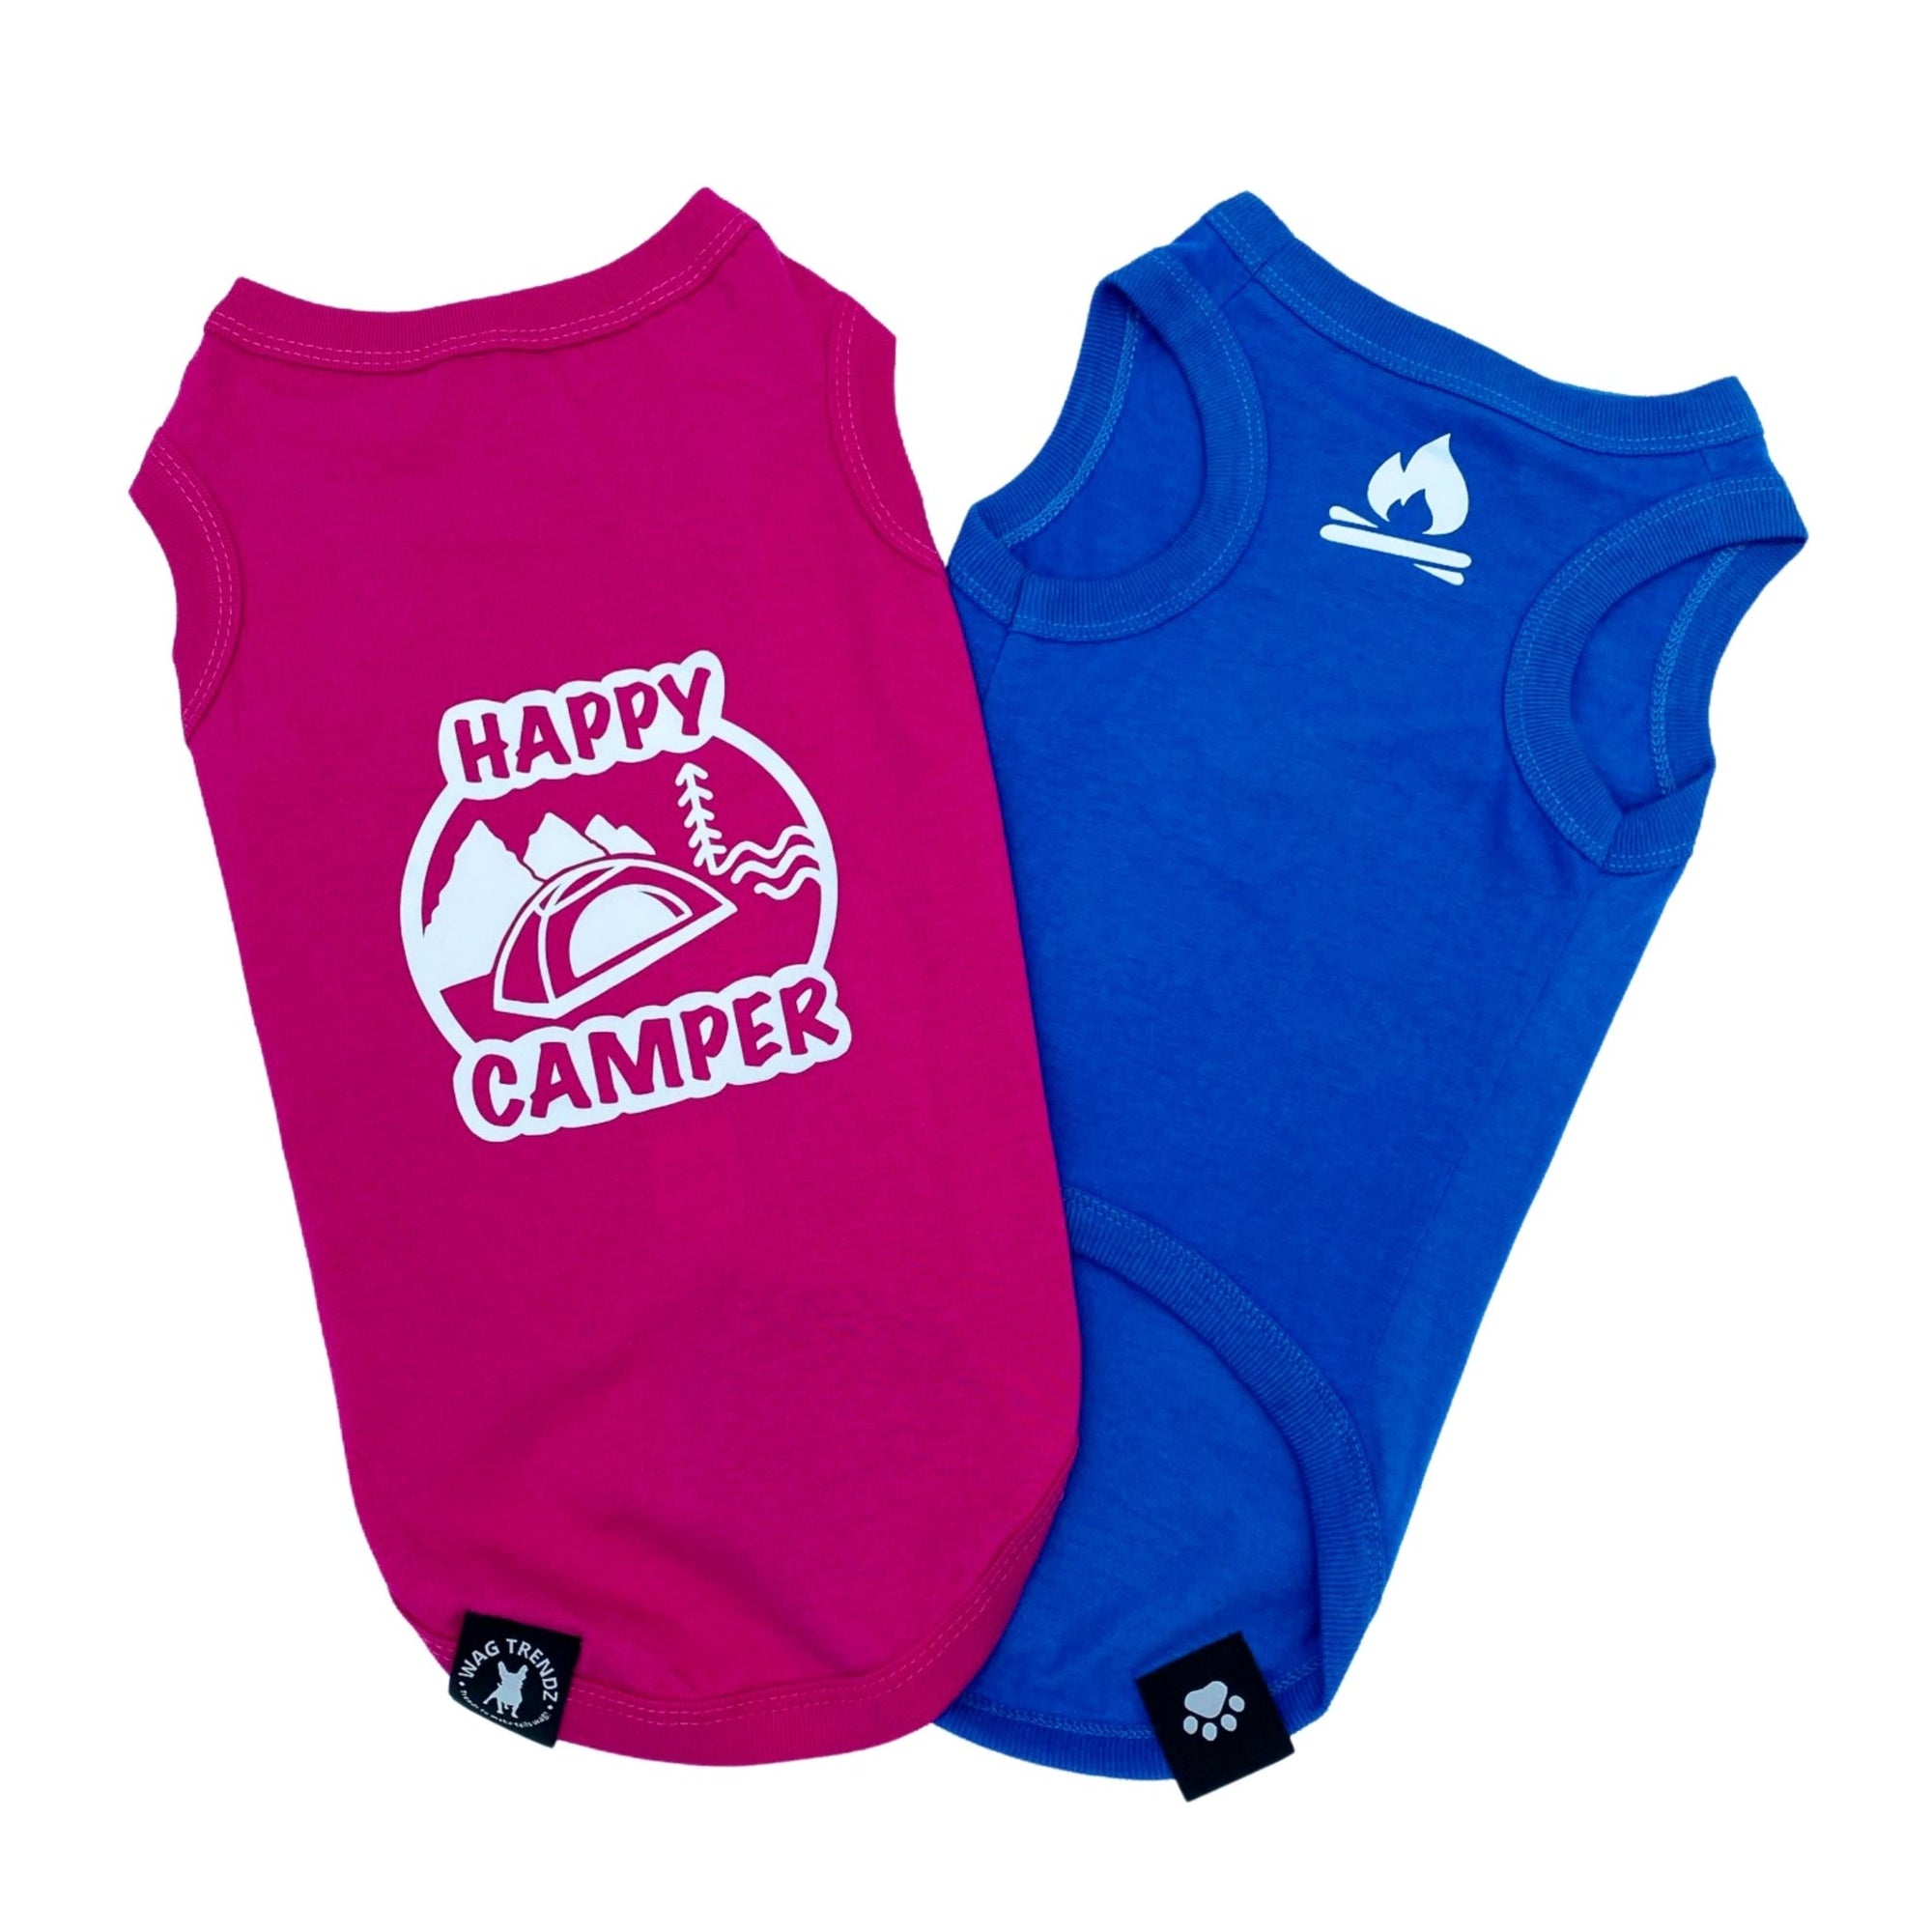 Dog T-Shirt - &quot;Happy Camper&quot; dog t-shirt - Hot Pink and Royal Blue - back view with Happy Camper and camping scene while blue t-shirt is chest view with campfire emoji - against solid white background - Wag Trendz